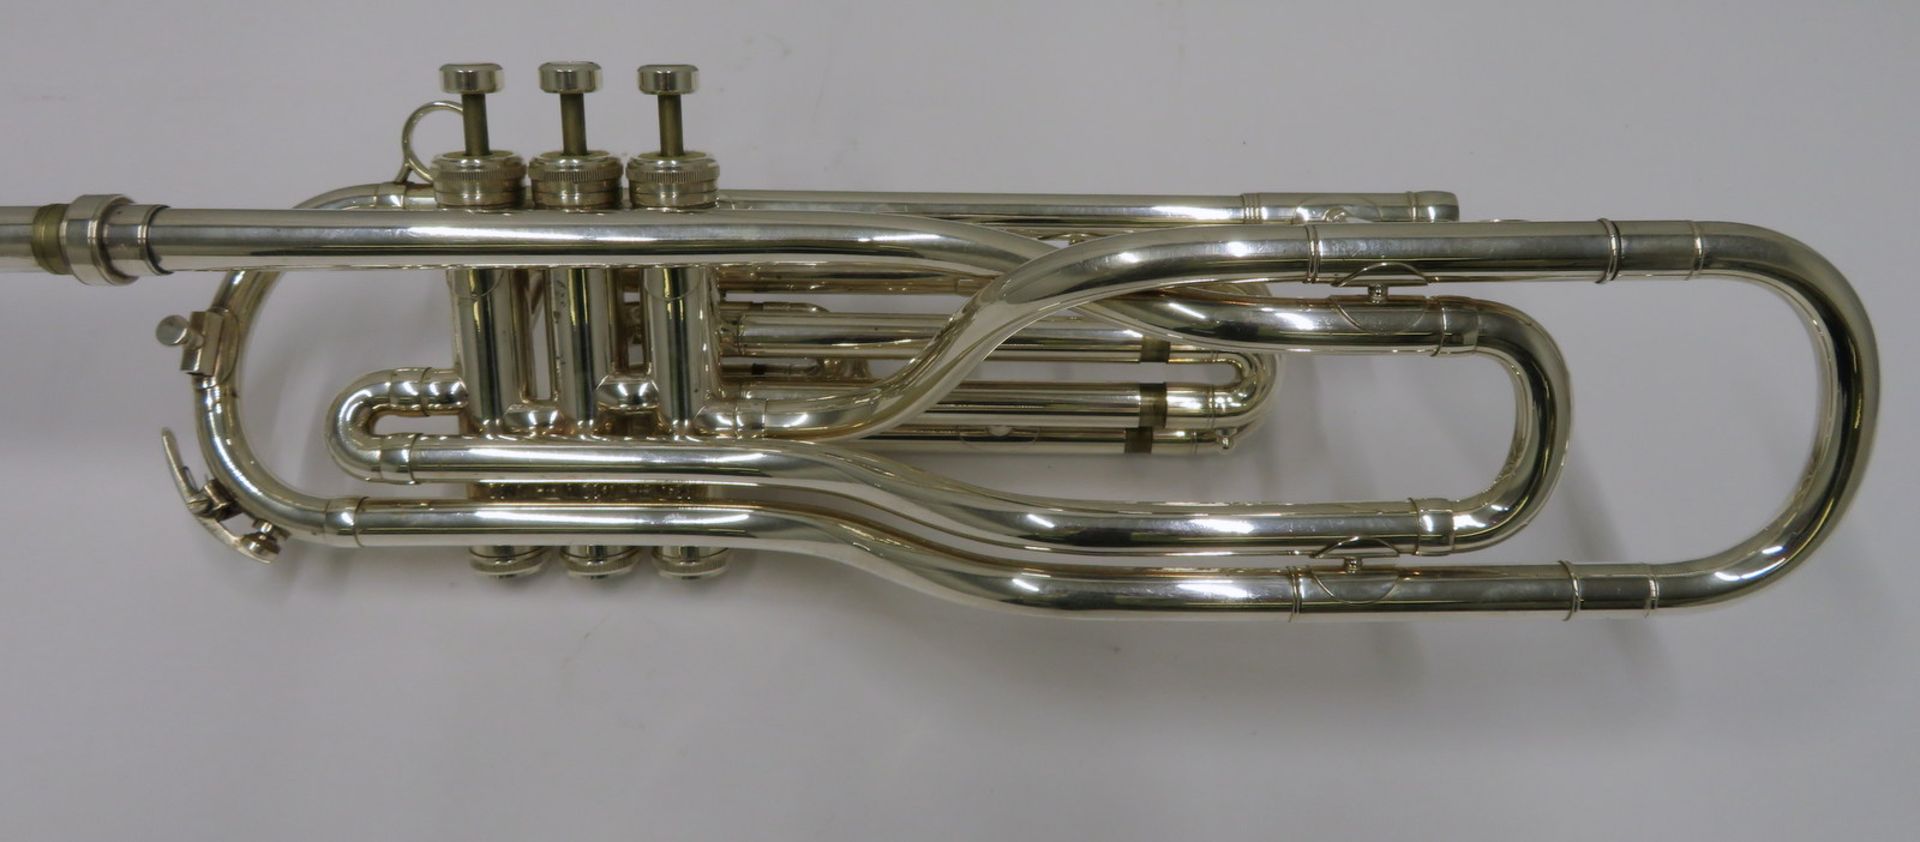 Besson International BE707 fanfare trumpet with case. Serial number: 884160. - Image 15 of 17